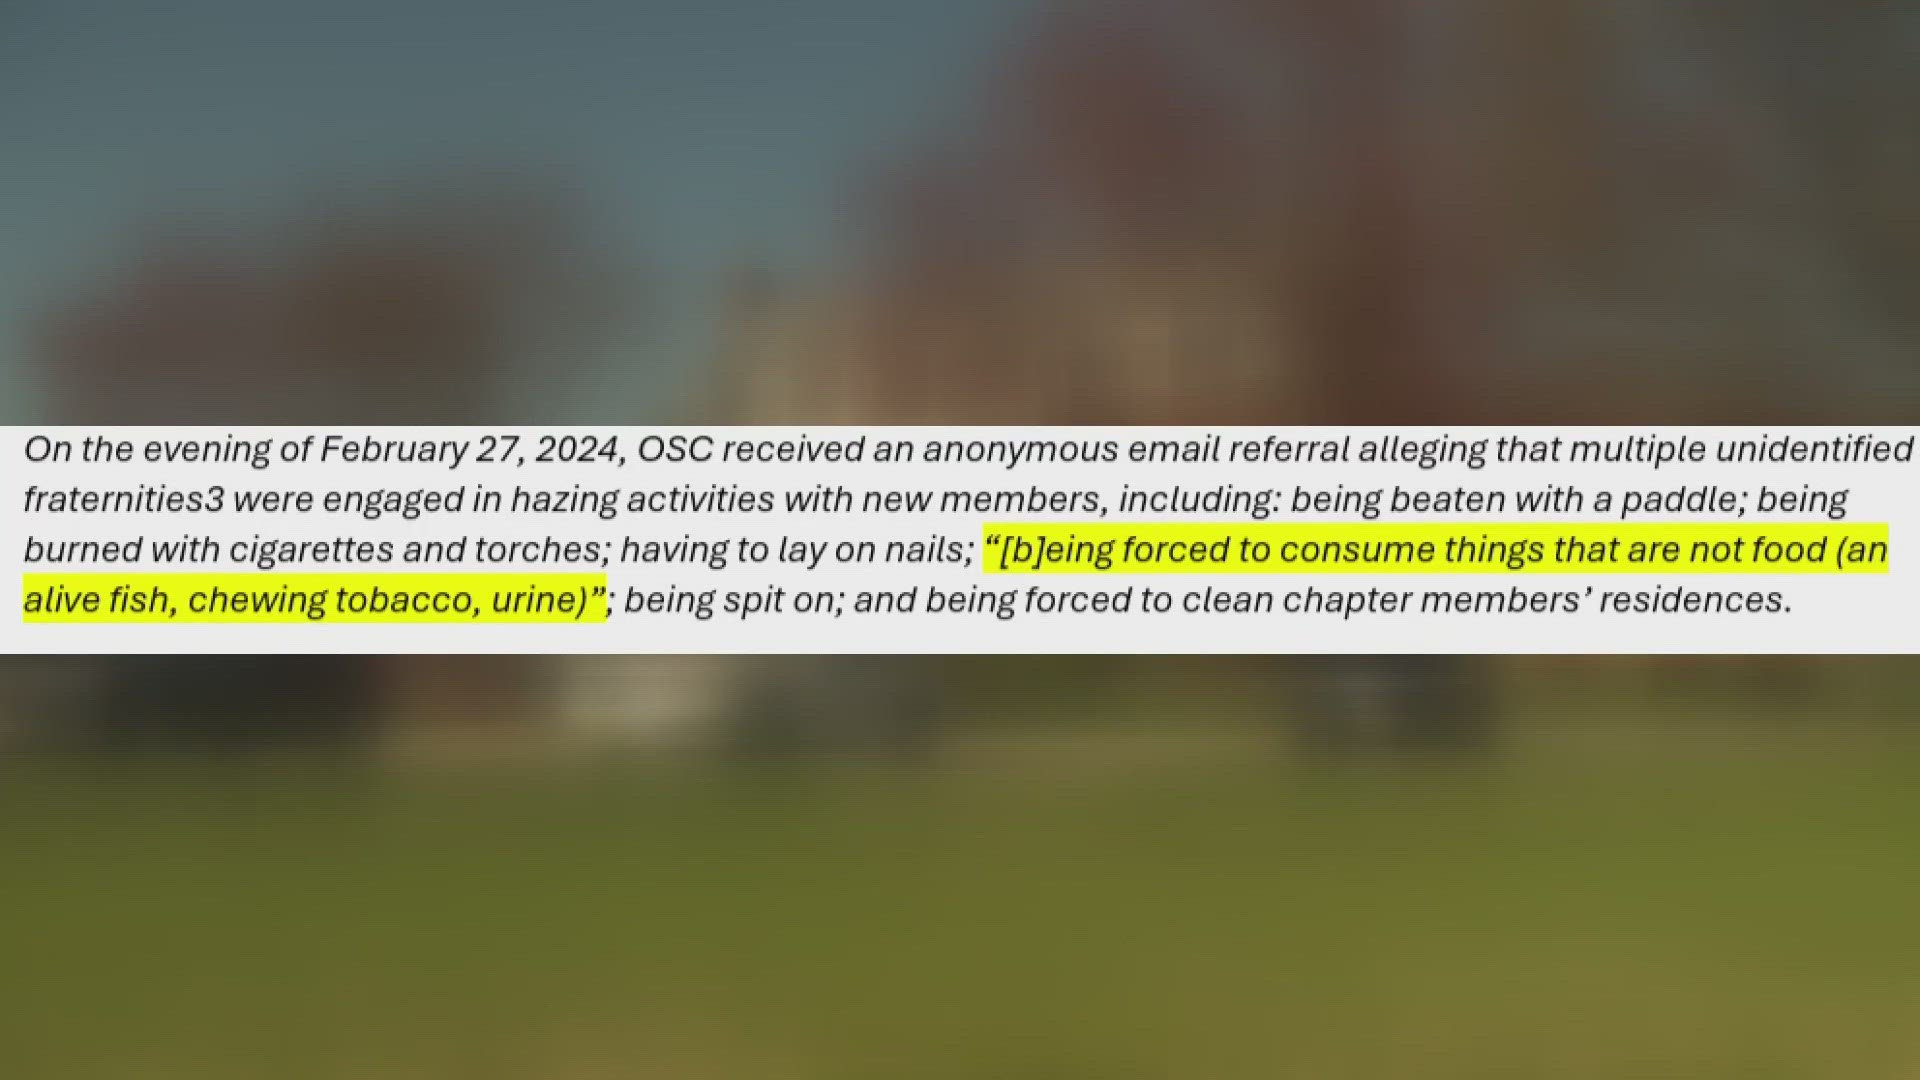 WUSA9 takes a closer look at the legal filings and allegations that led to the investigation and temporary suspension of social activities in UMD Greek Life